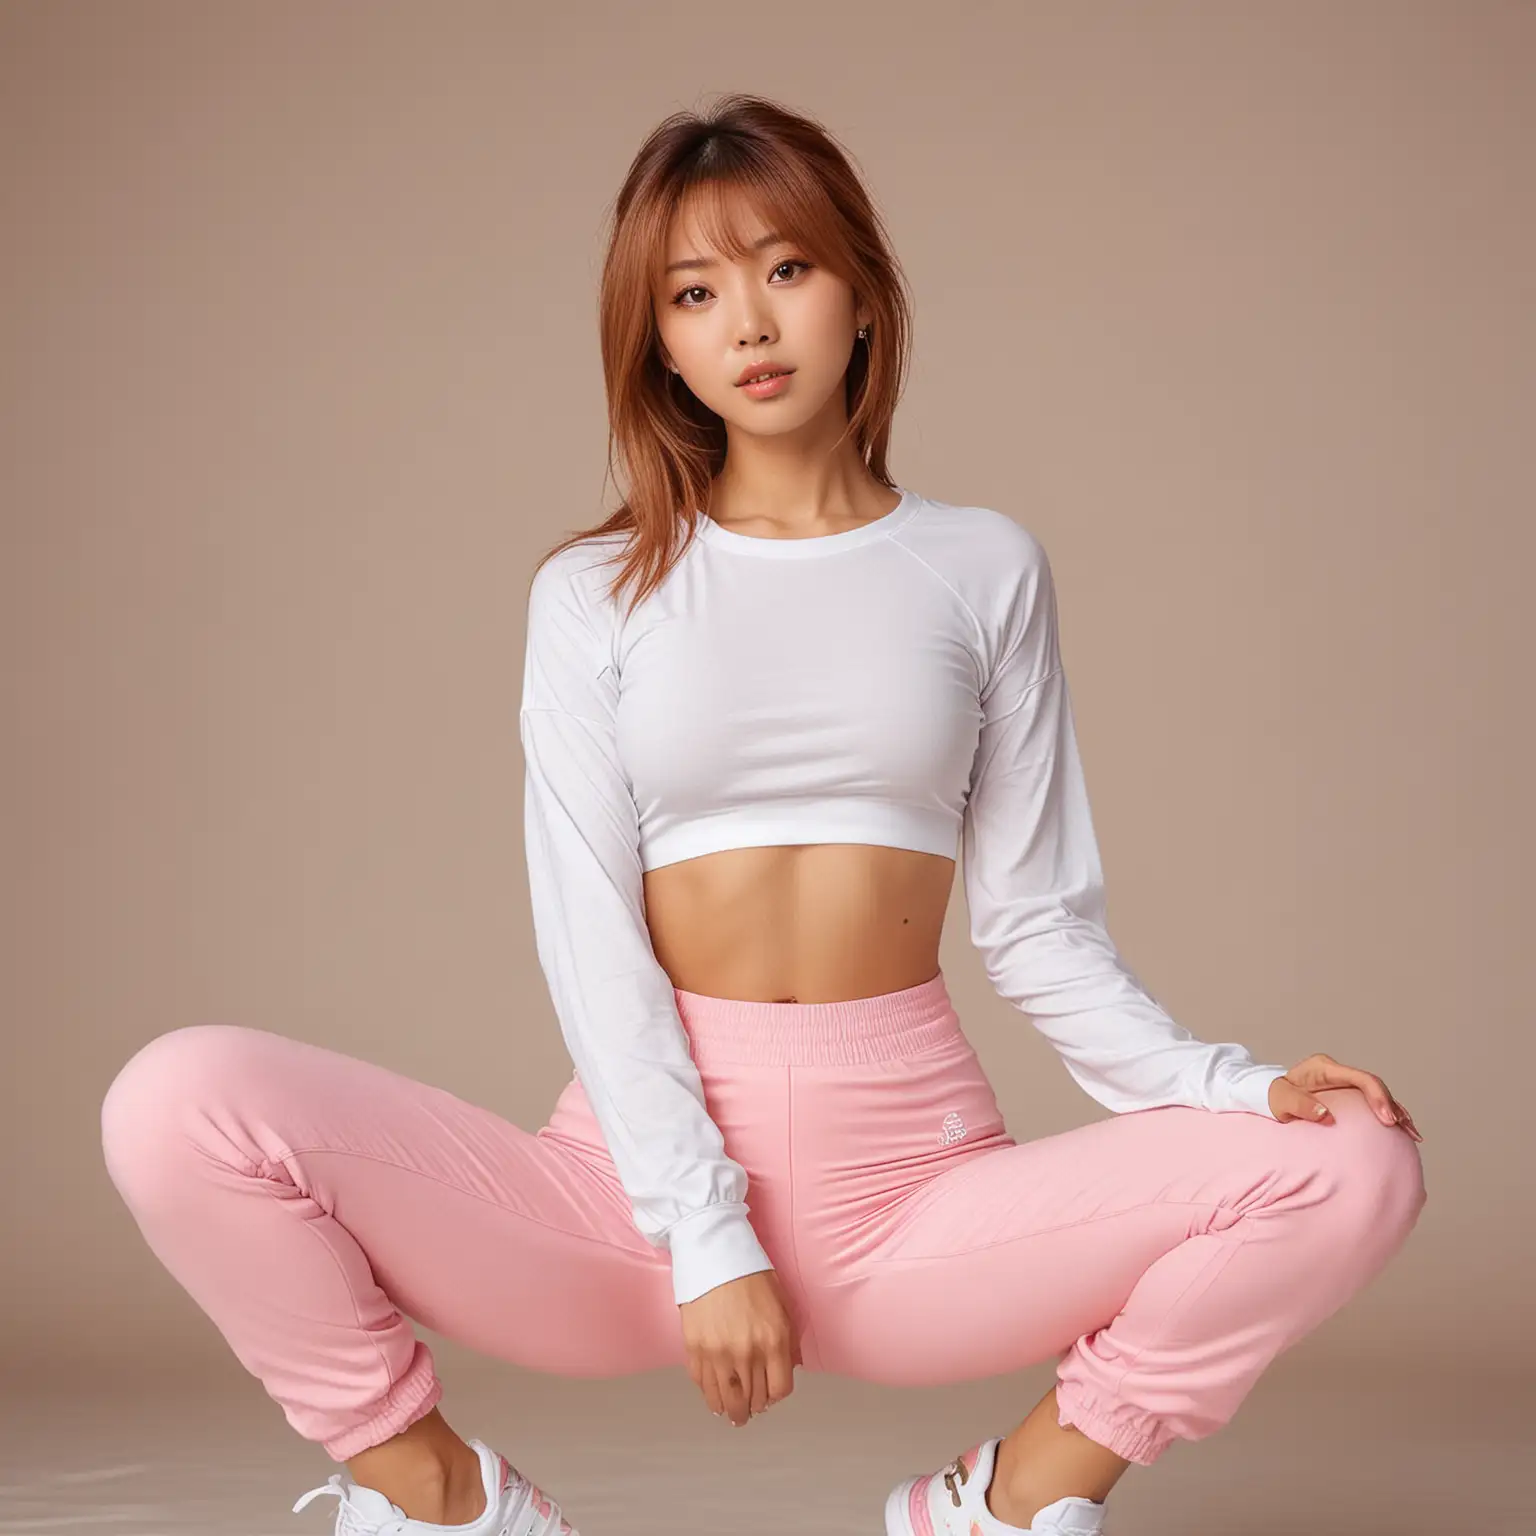 Japanese girl with caramel-colored medium length hair, big amber eyes, white top, pink yoga pants, white sneakers, posing at her back 